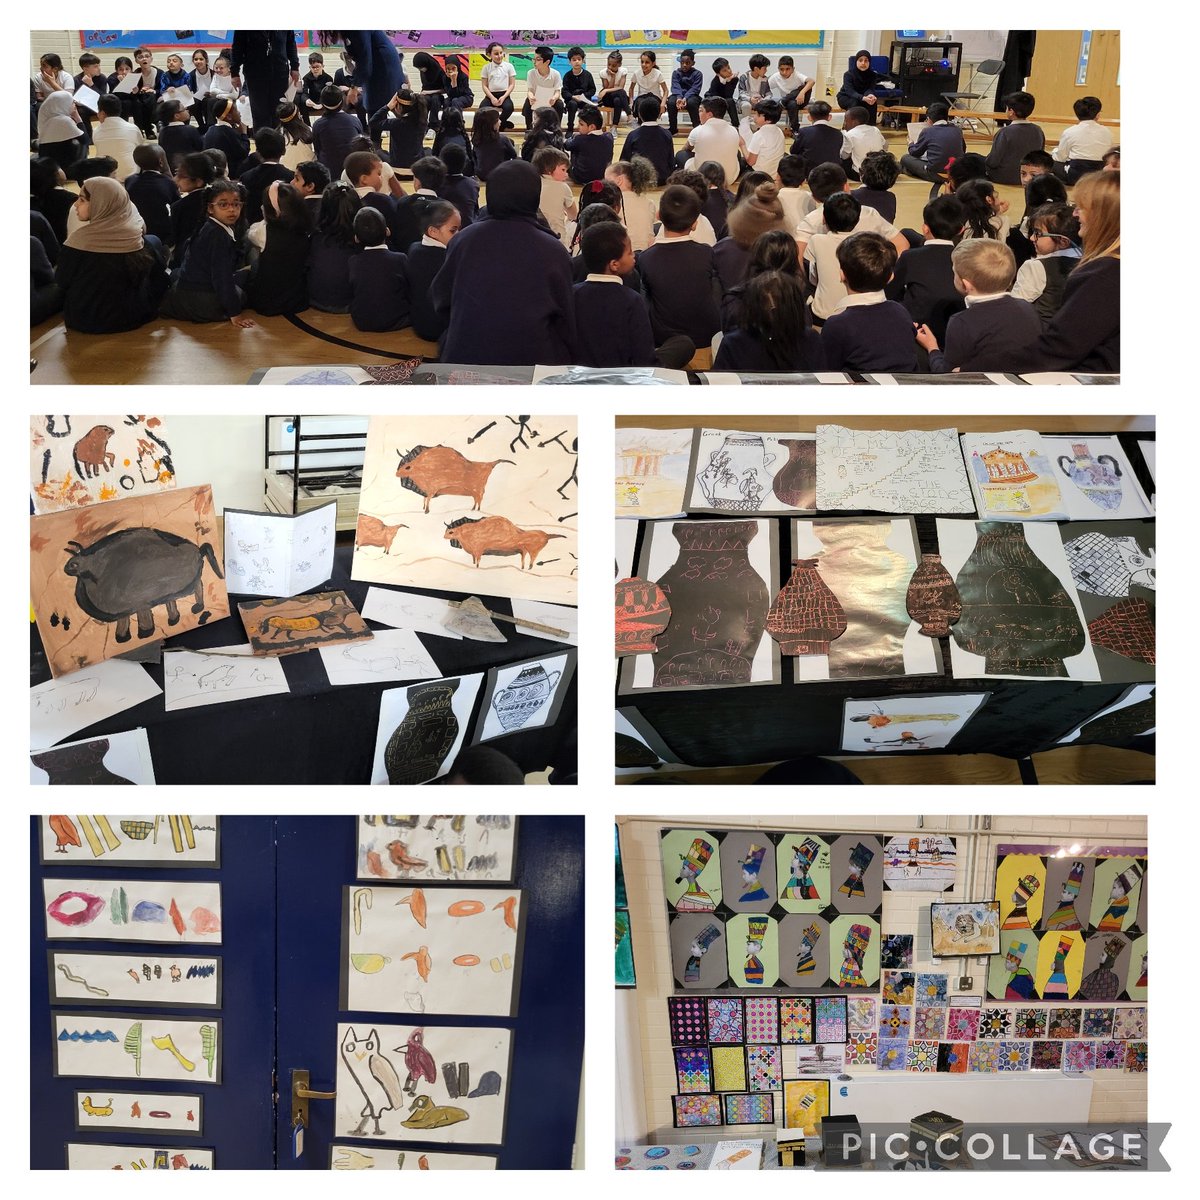 Well done to Years 3 and 4, sharing their joint Challenge Outcome, a Night at the Museum, with an interactive Q&A. Wonderful!